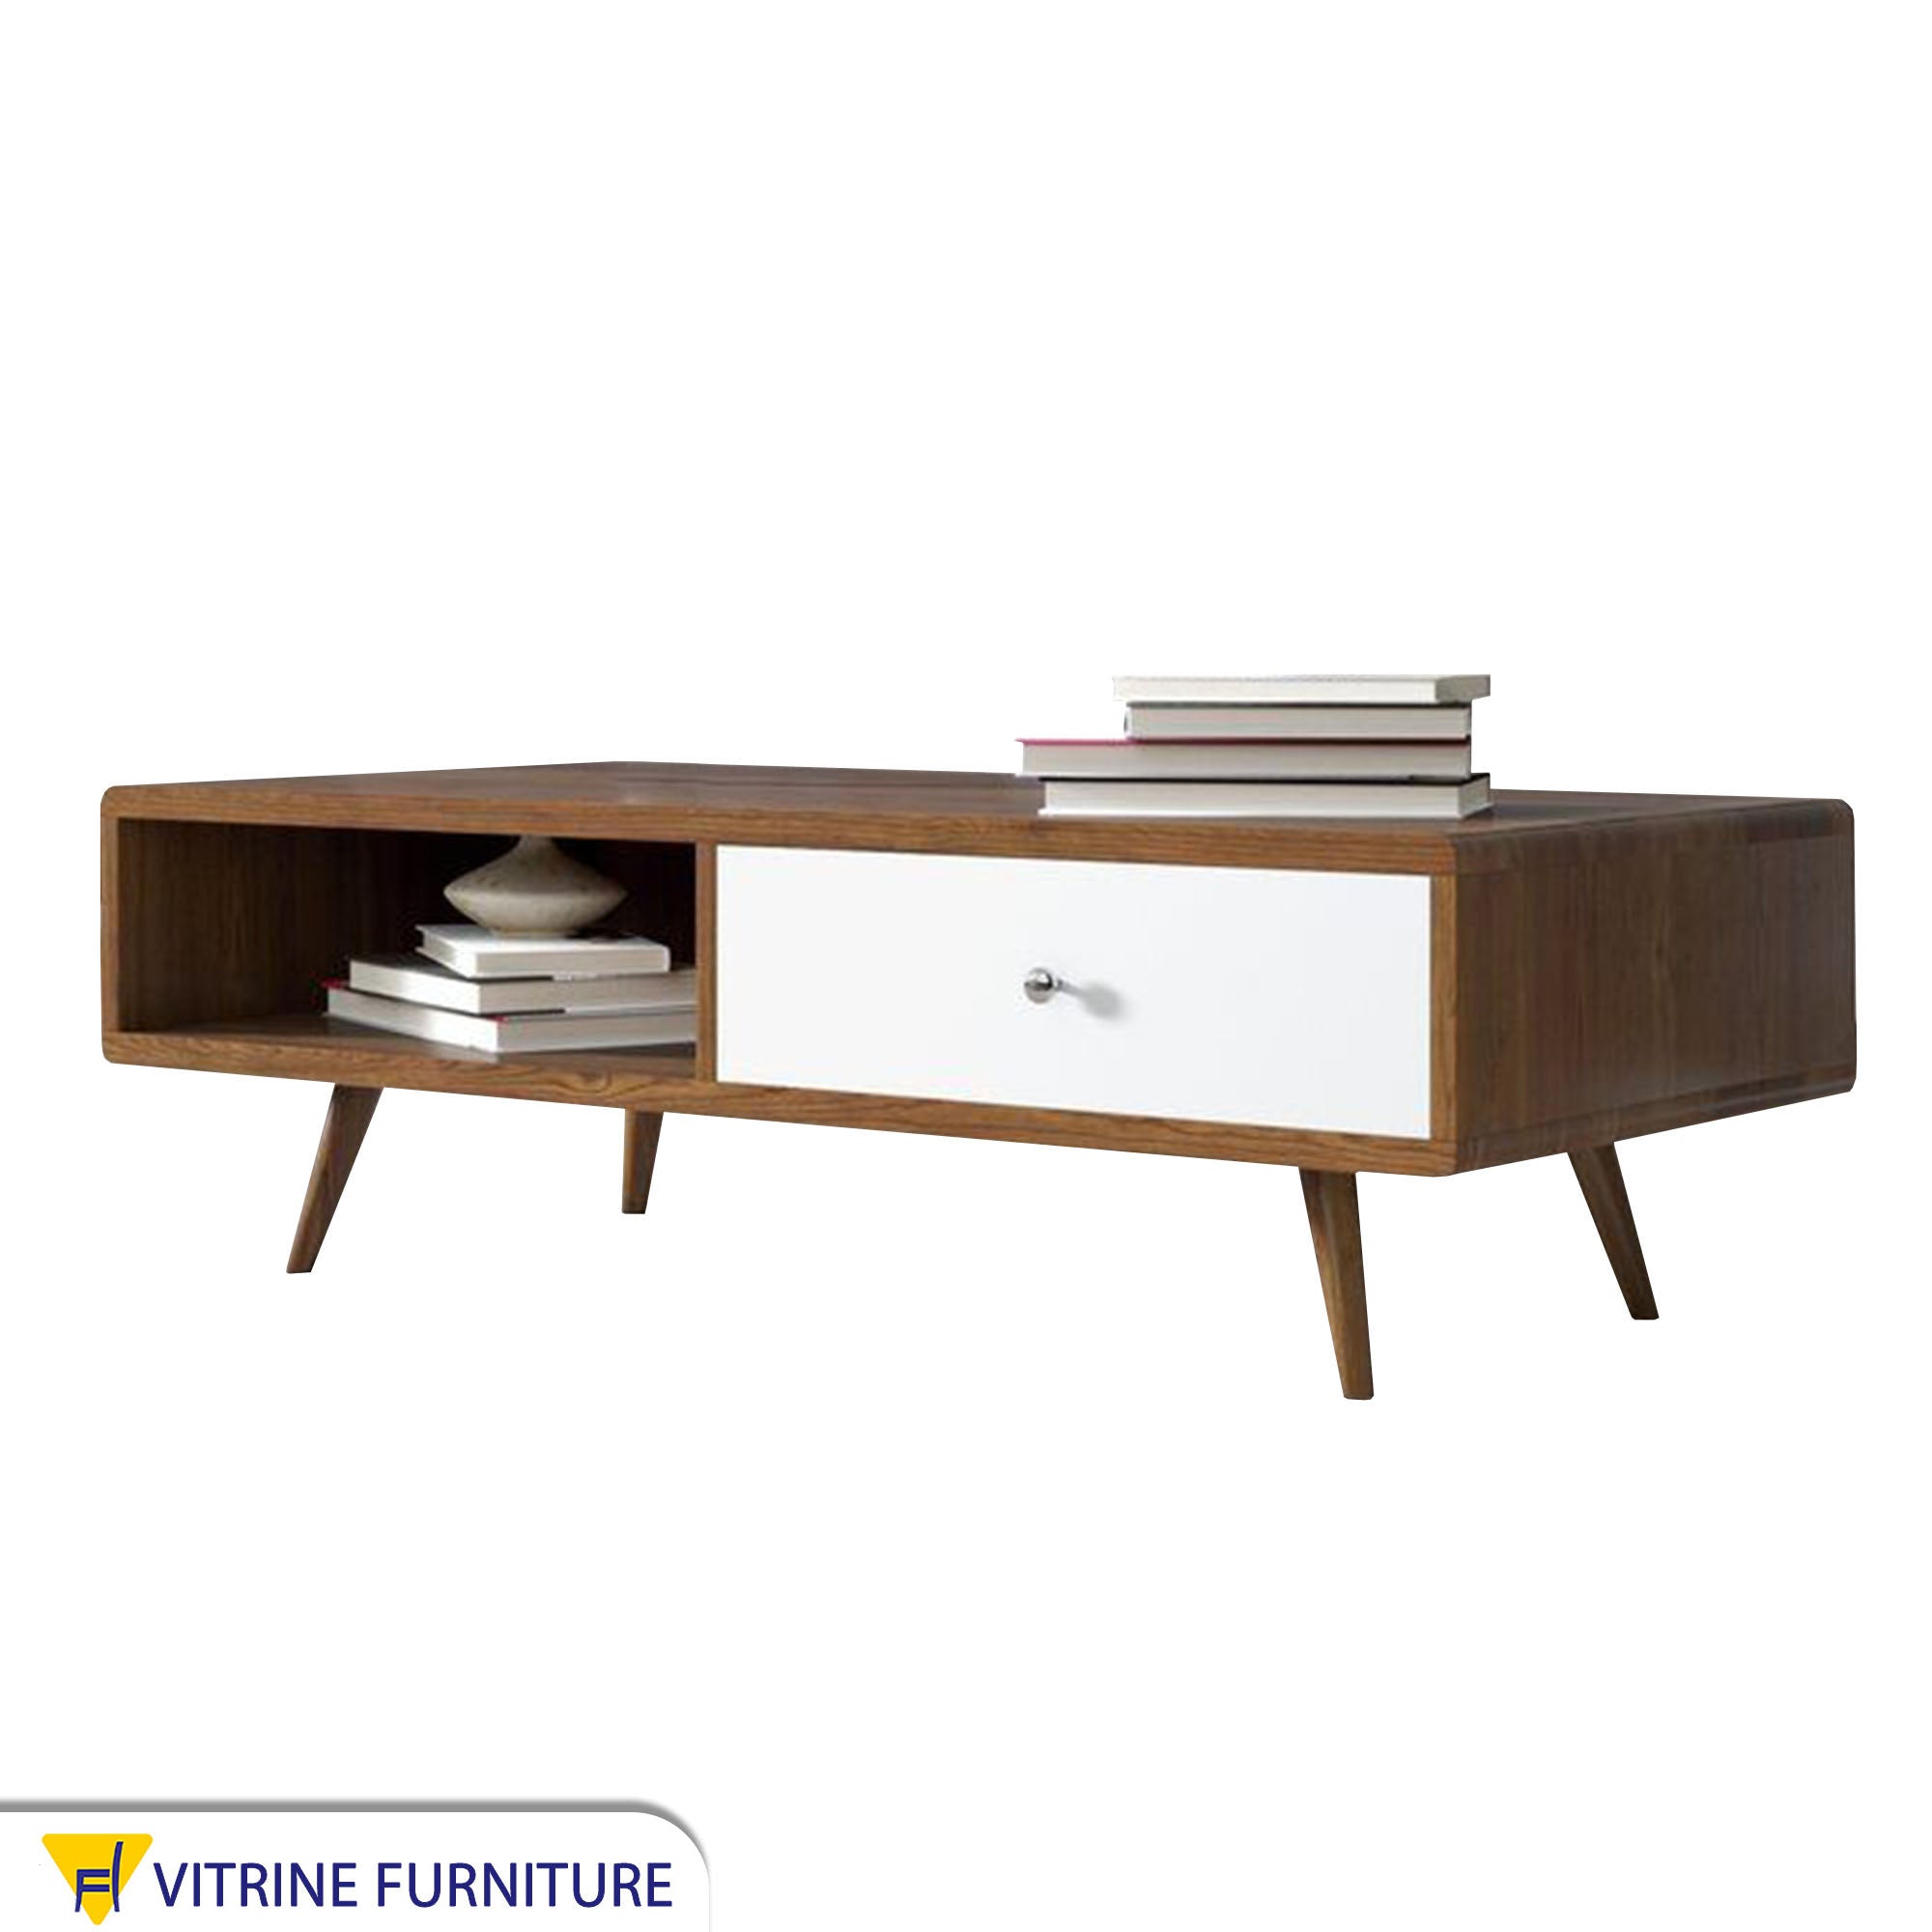 Center table with high slanted legs